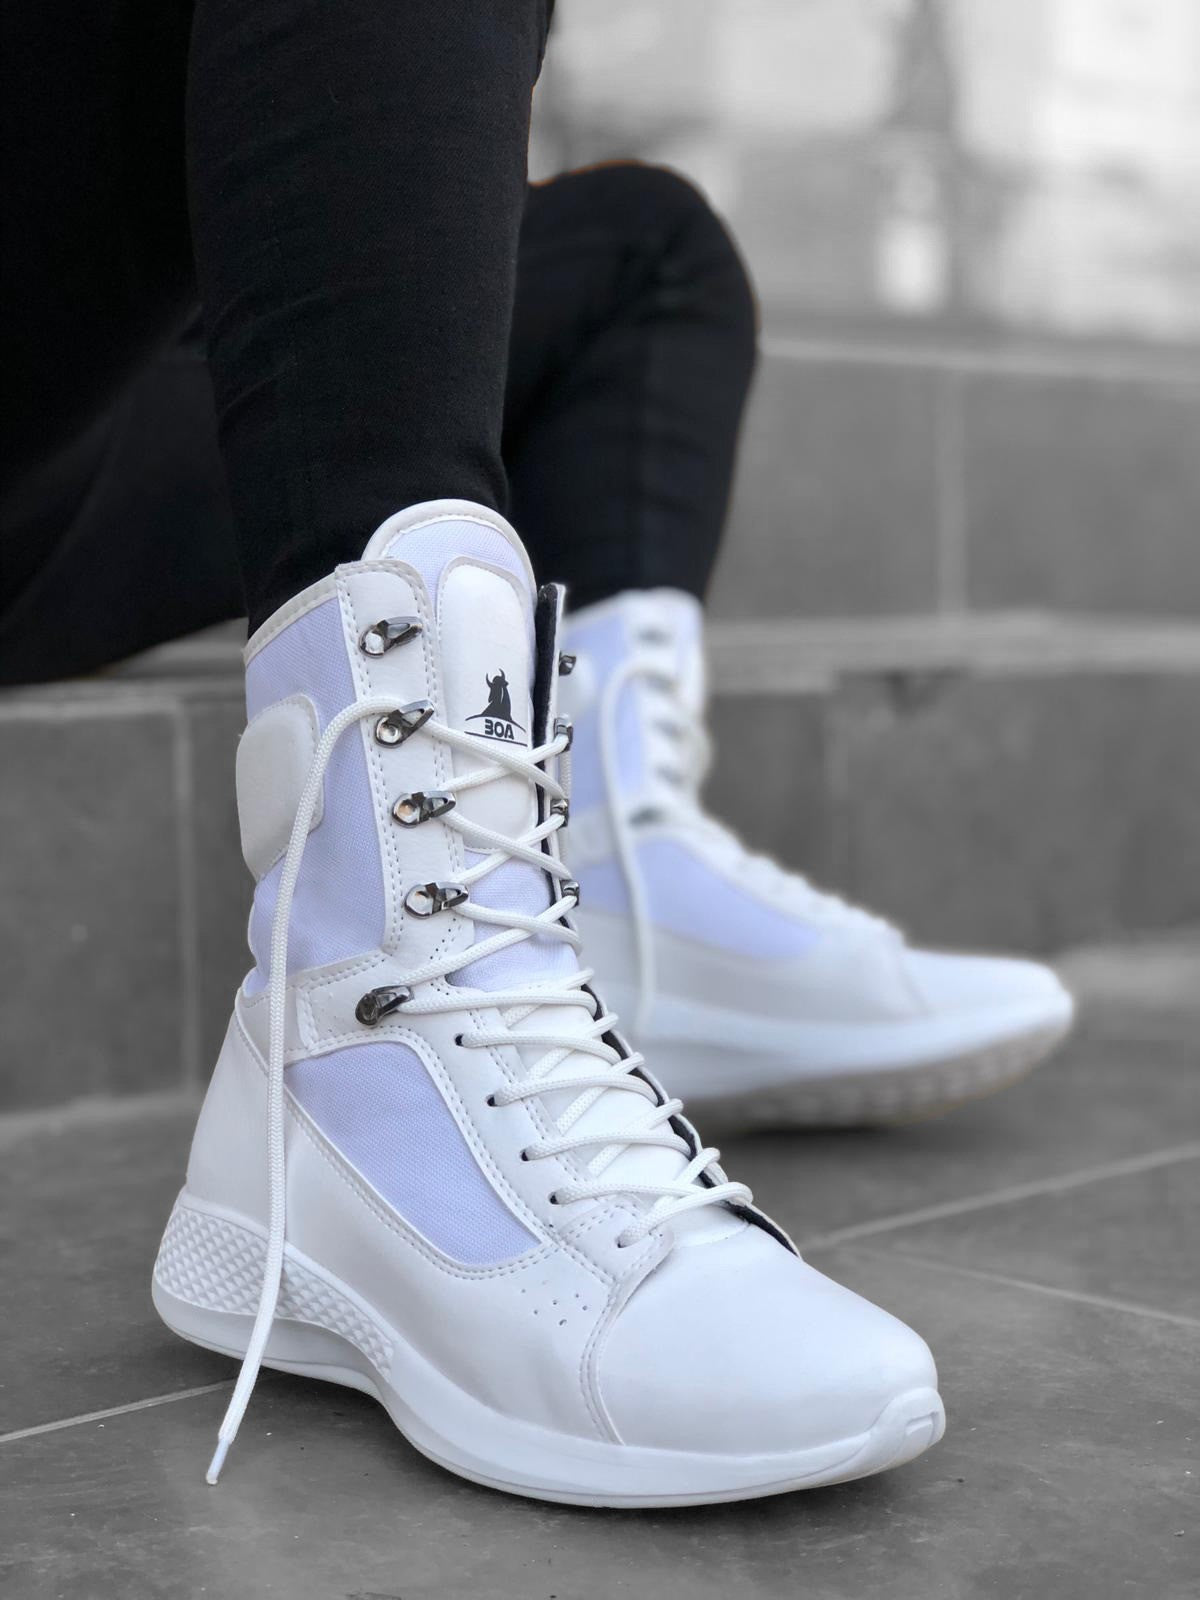 BA0600 Lace-Up White High Sole Boxer Unisex Sport Winter Boots - STREETMODE™